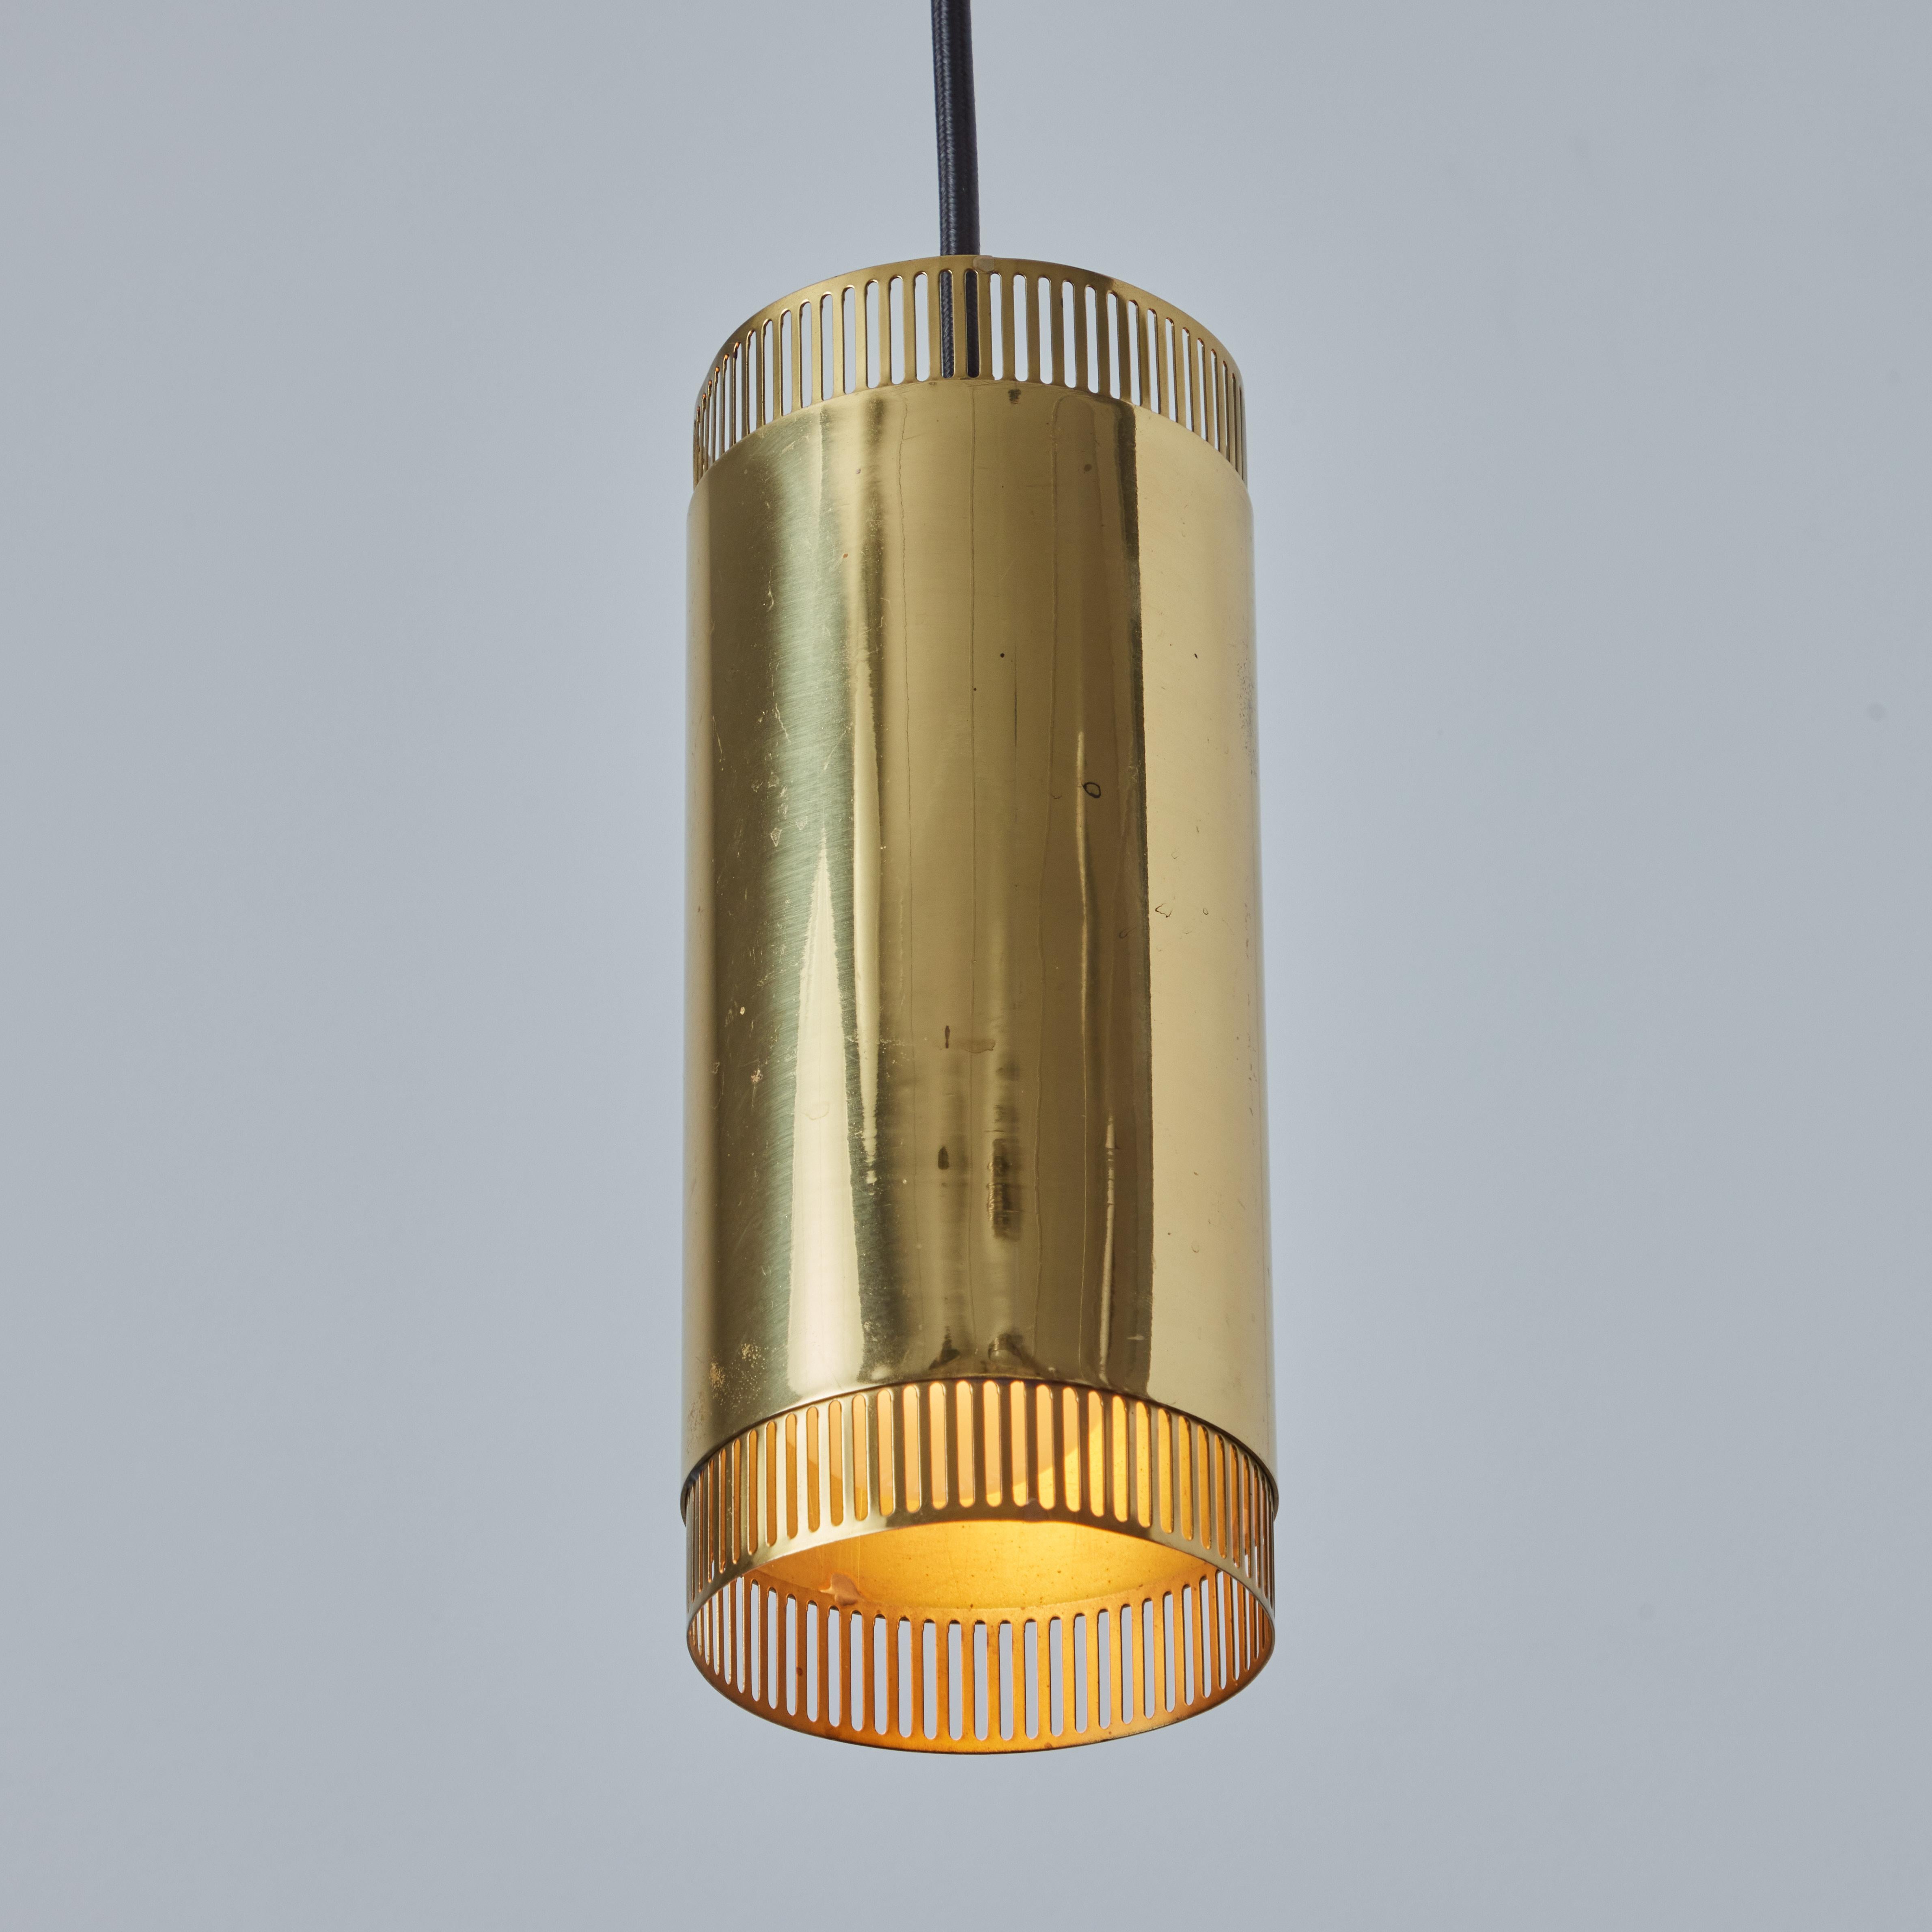 1960s Perforated Brass Cylindrical Pendant Attributed to Mauri Almari for Idman. A quintessential example of Finnish design, these pendants are executed in perforated polished brass and have been professionally modified for mounting over a standard